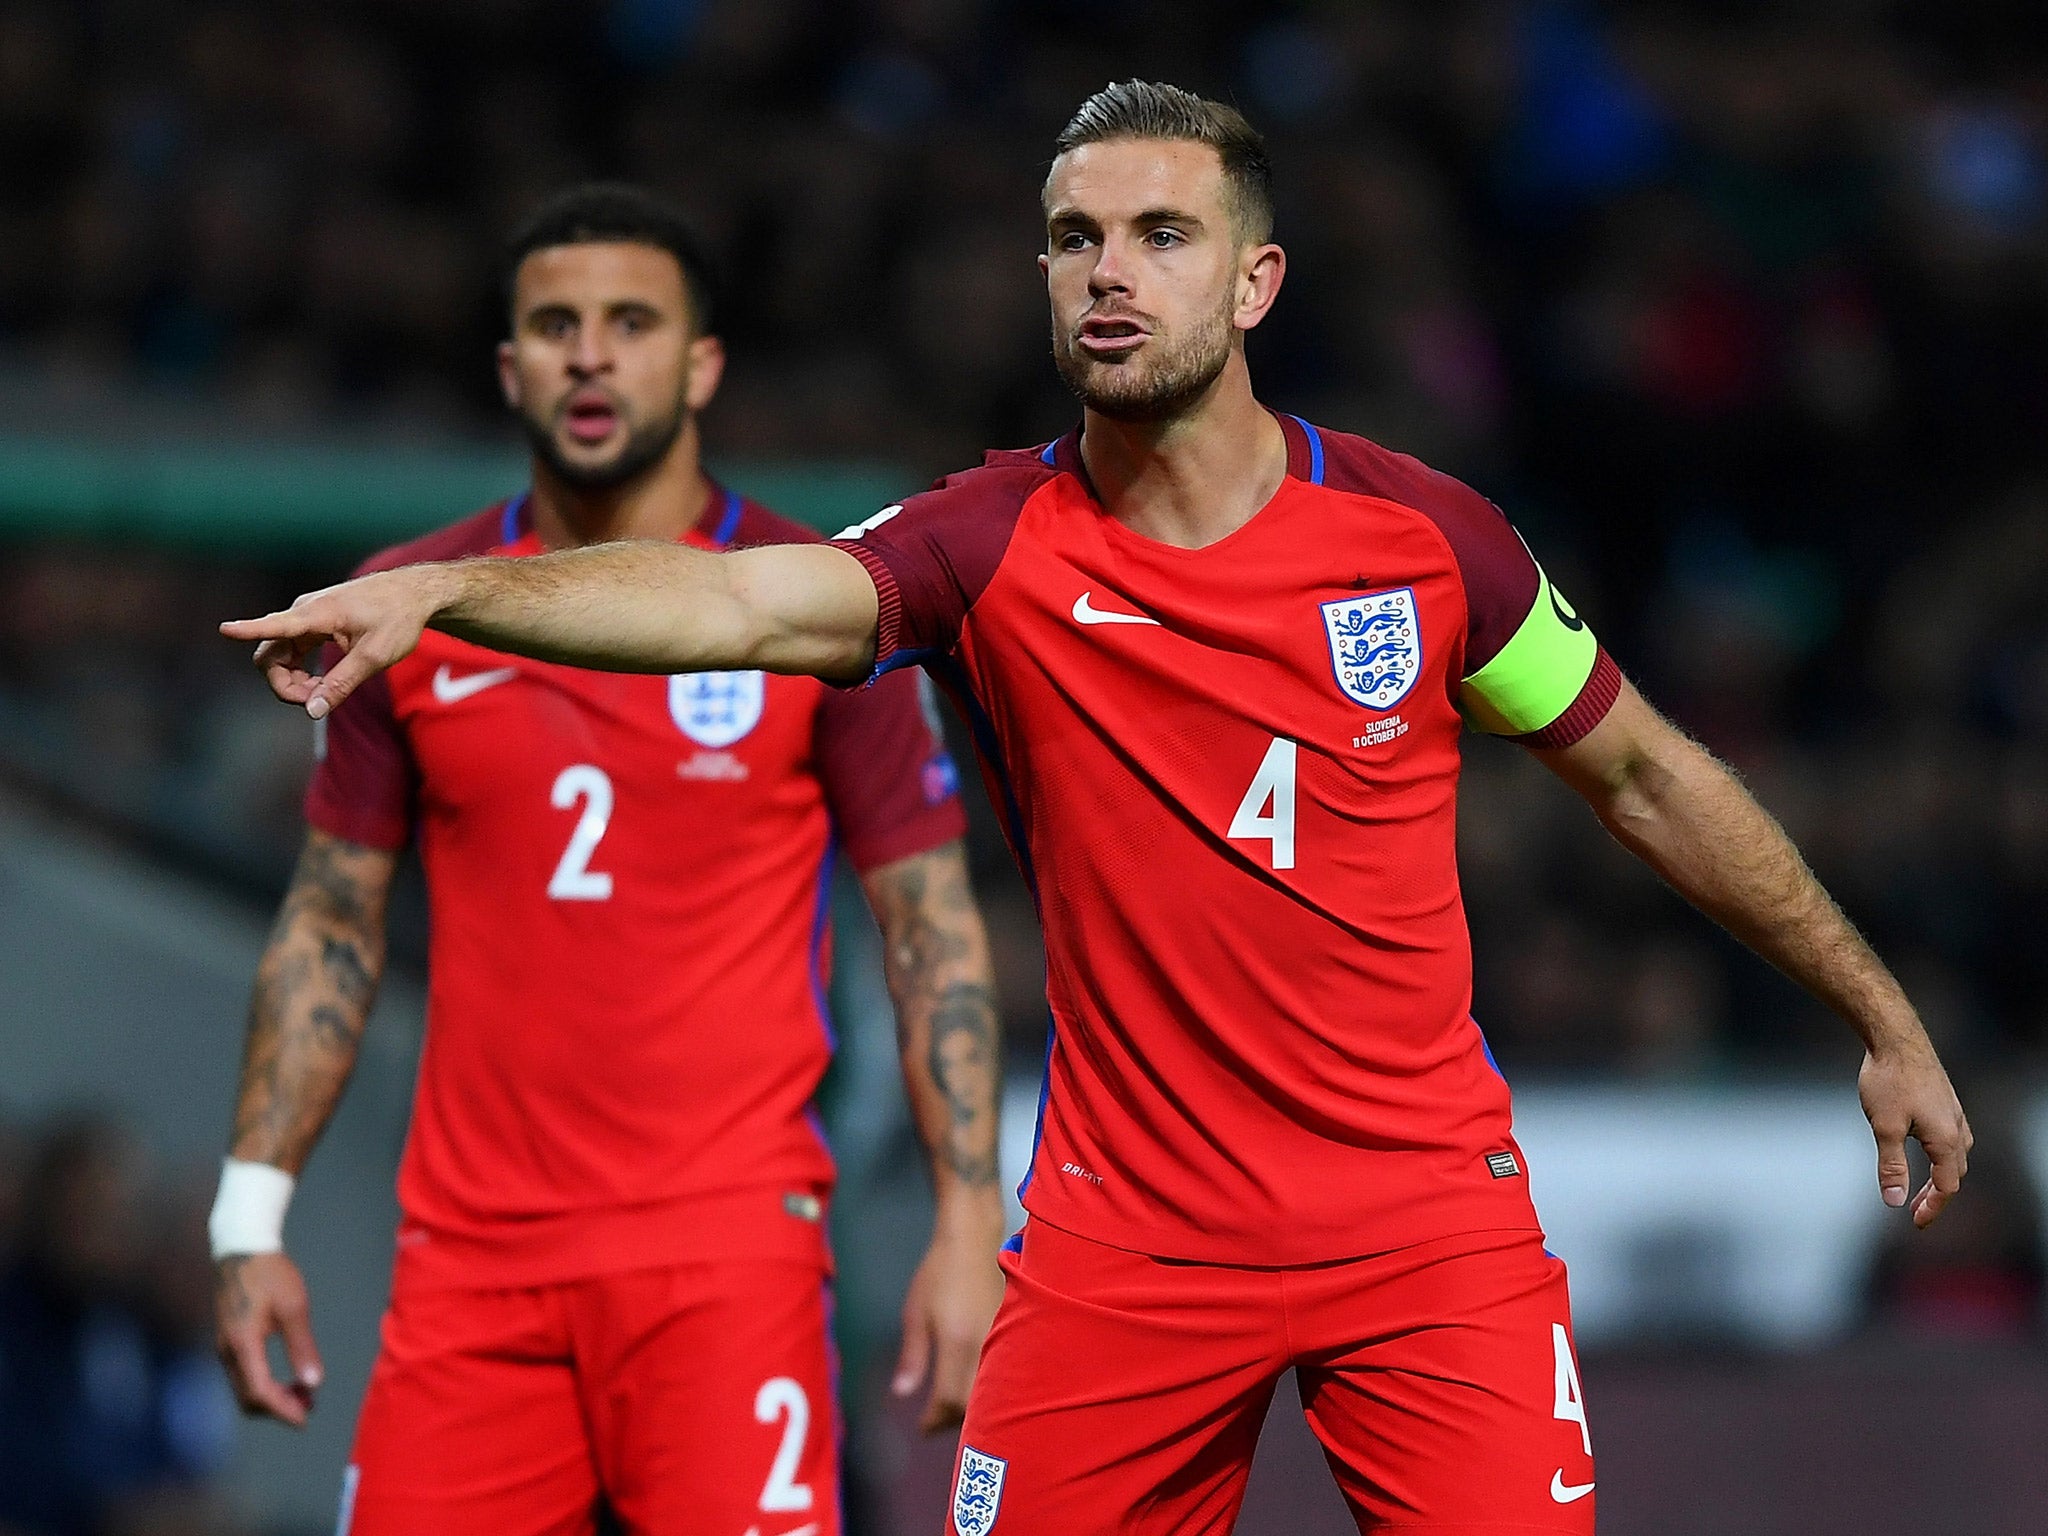 Jordan Henderson nearly gifted Slovenia victory against England when his 'no-look pass' went horribly wrong